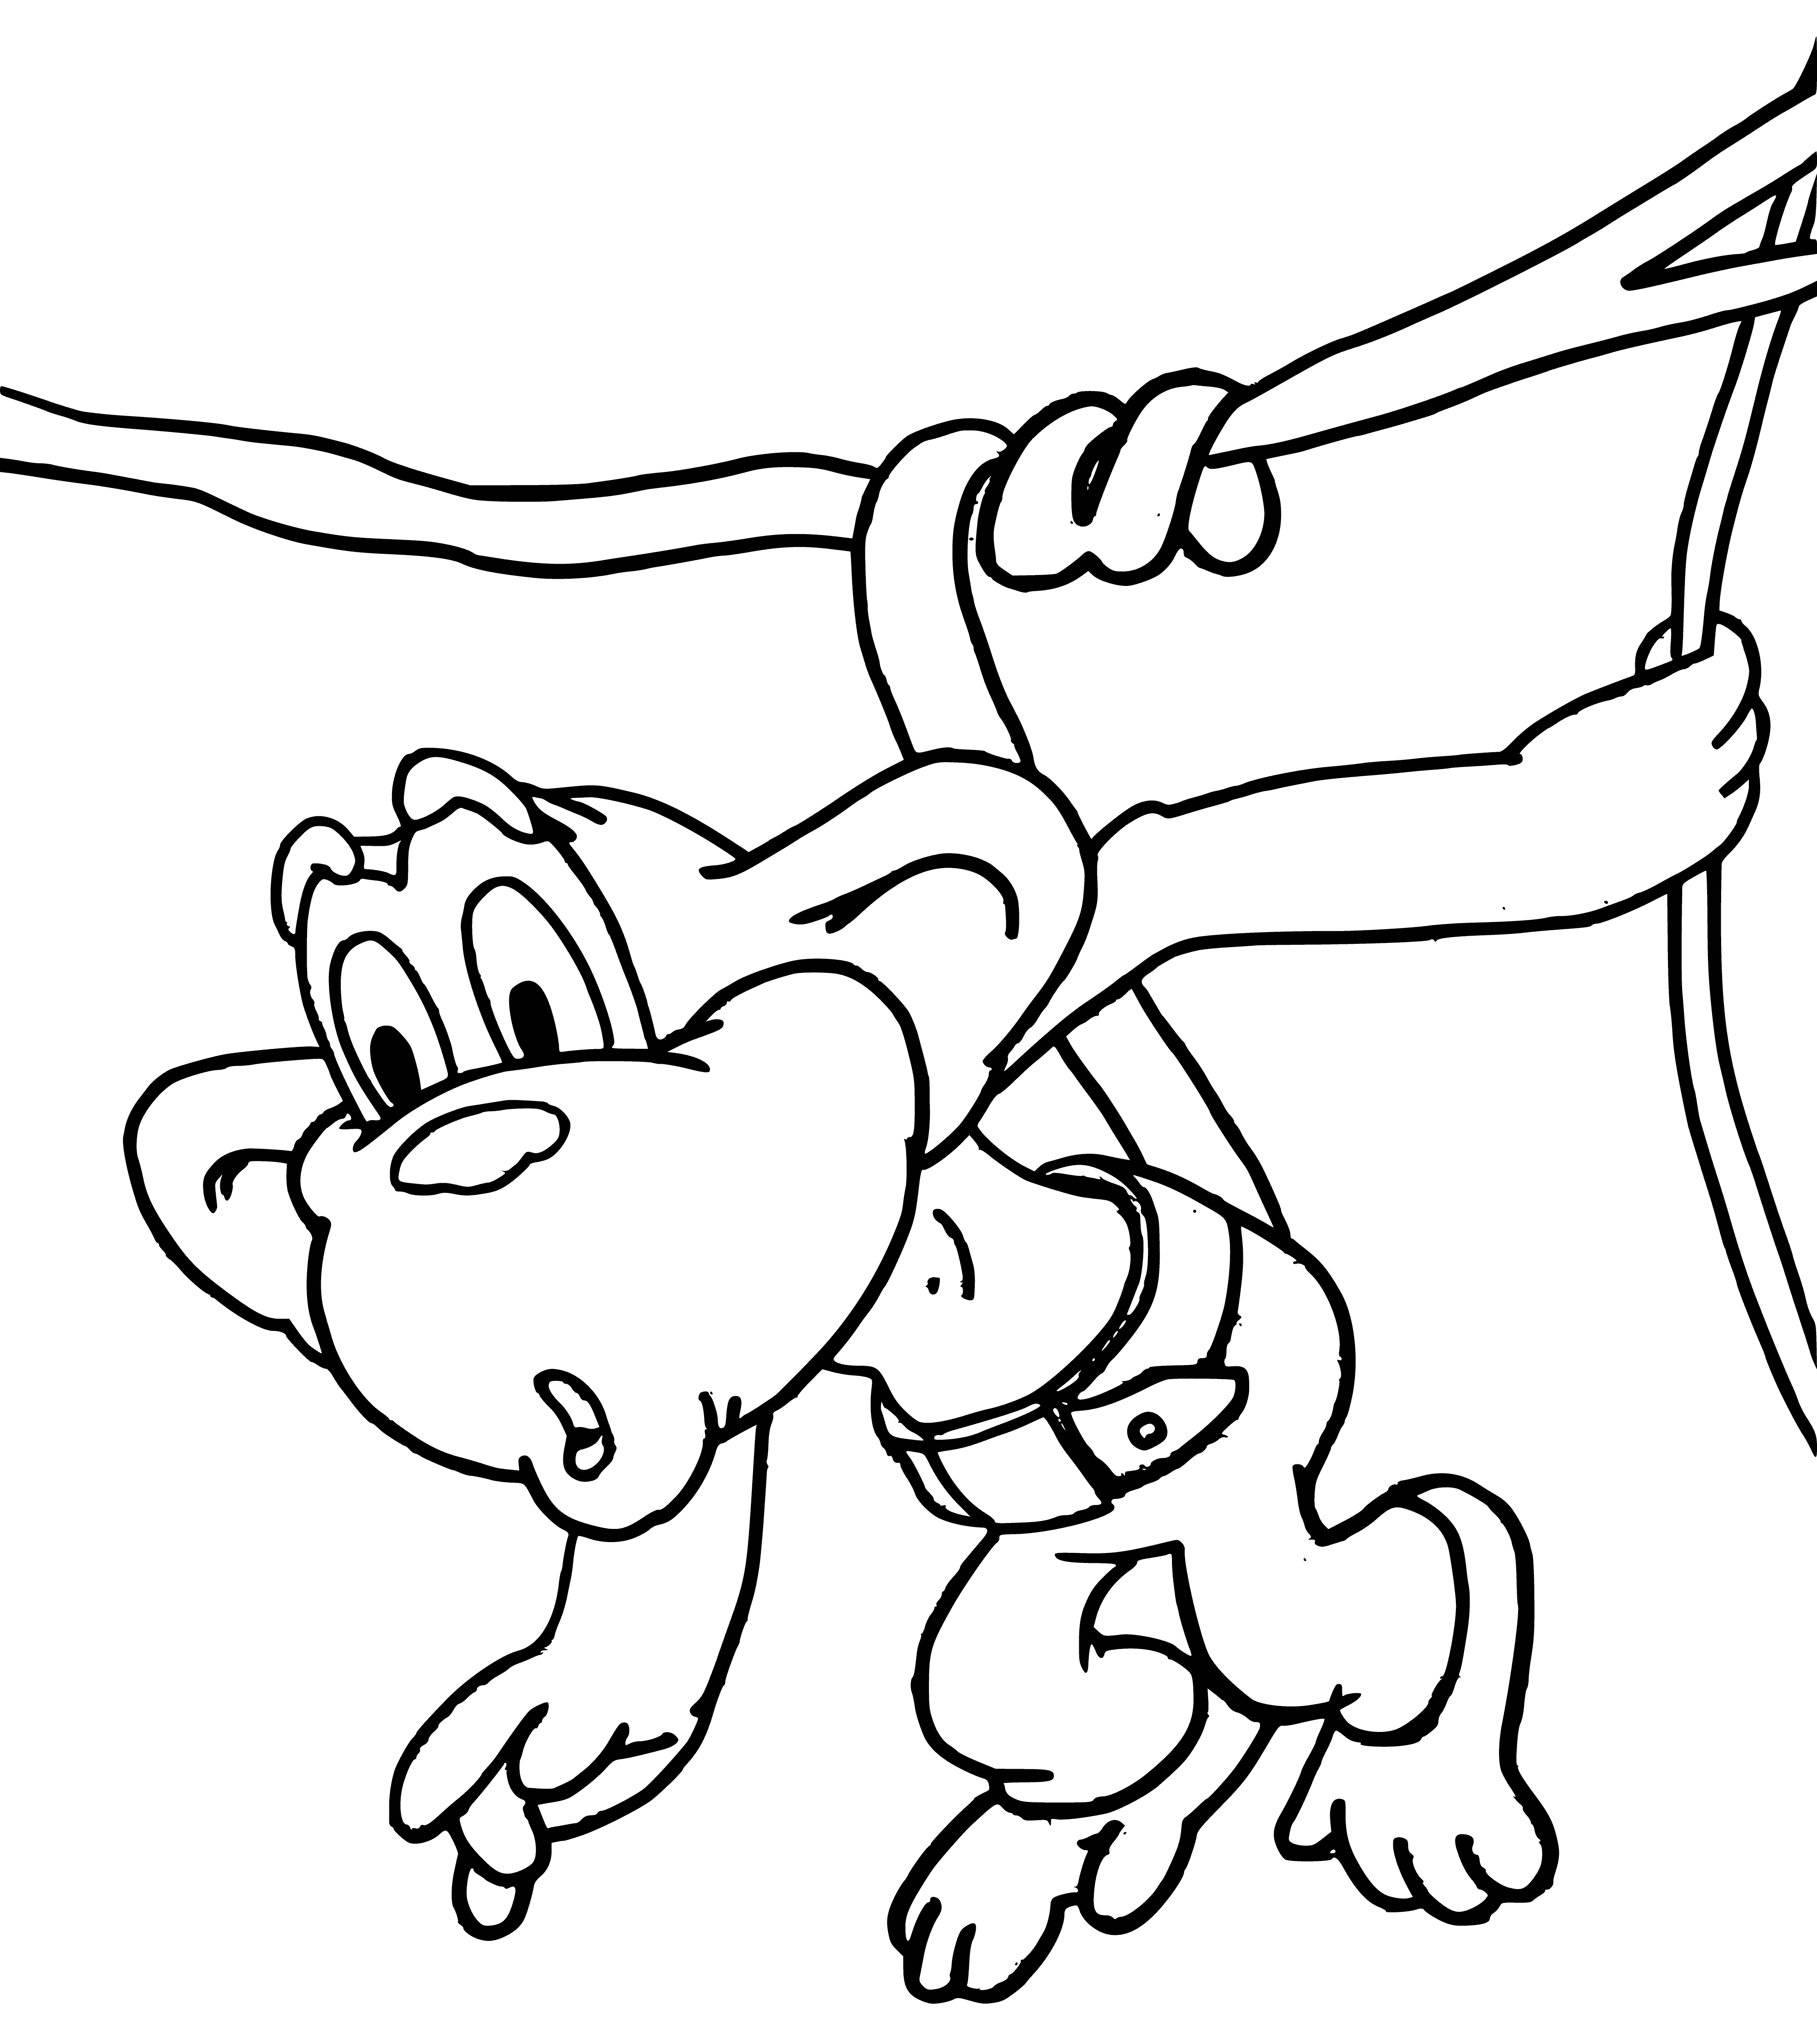 coloring page: The small raccoon peers from behind the large monkey, its fur dark and mask white, eyes wide with curiosity.